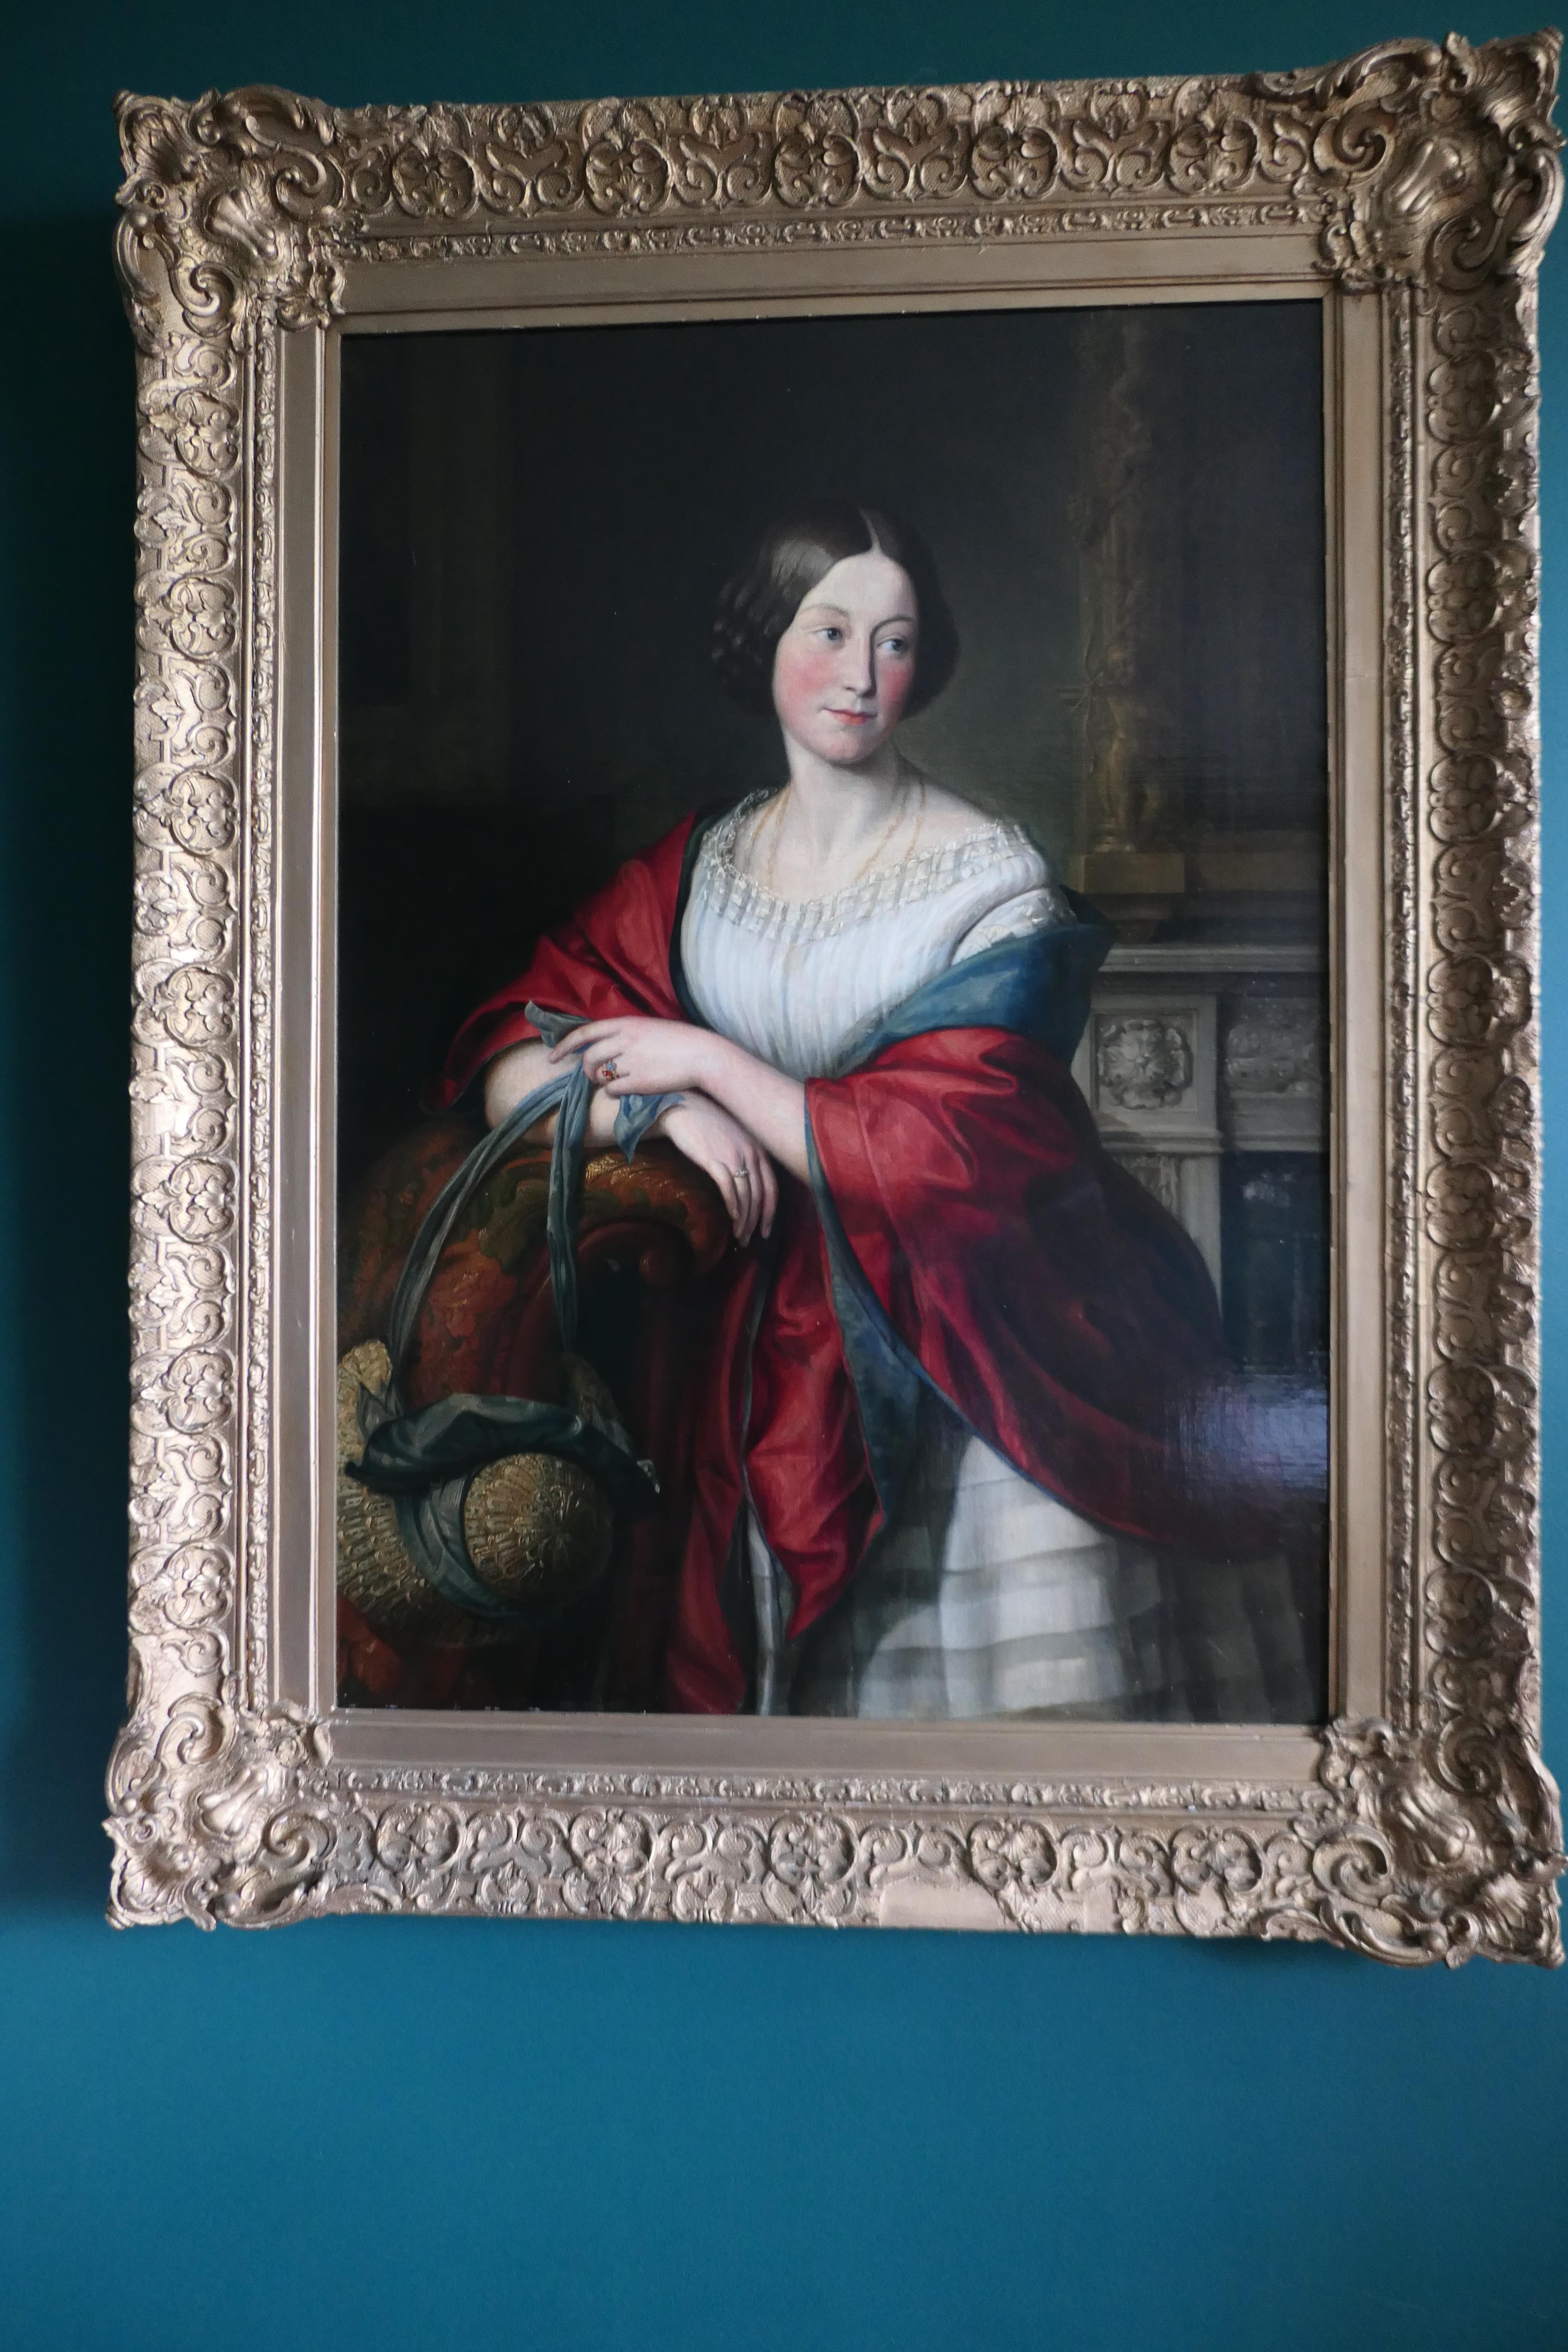 19th century oil on canvas portrait of Mary Harris Stretton, with bonnet and shawl

A Delightful portrayal of a young lady at 35 years of age, she is leaning on the arm of a chair, wearing a bright red shawl and and holding the ribbons of her